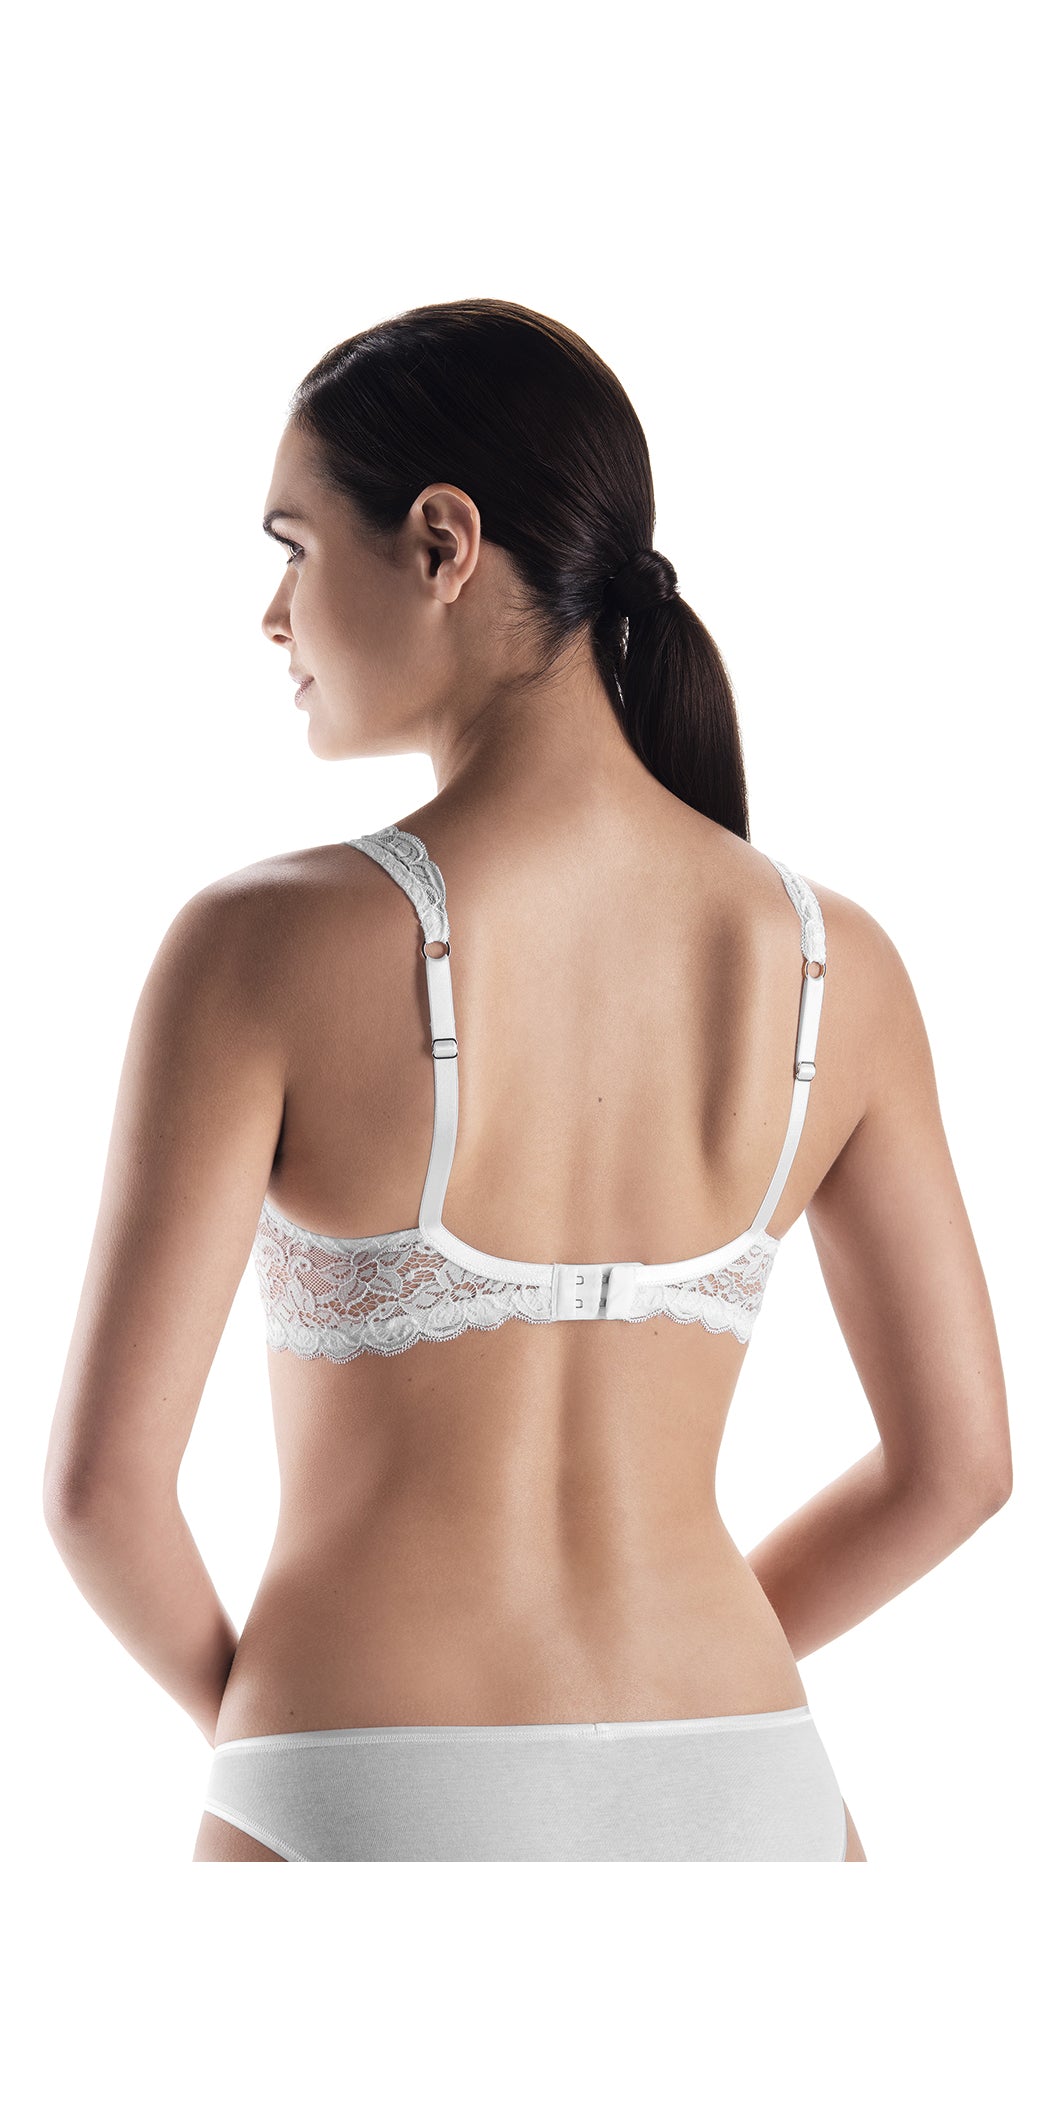 Hanro BEIGE Cotton Sensation Full Busted Soft Cup Bra, US 36 